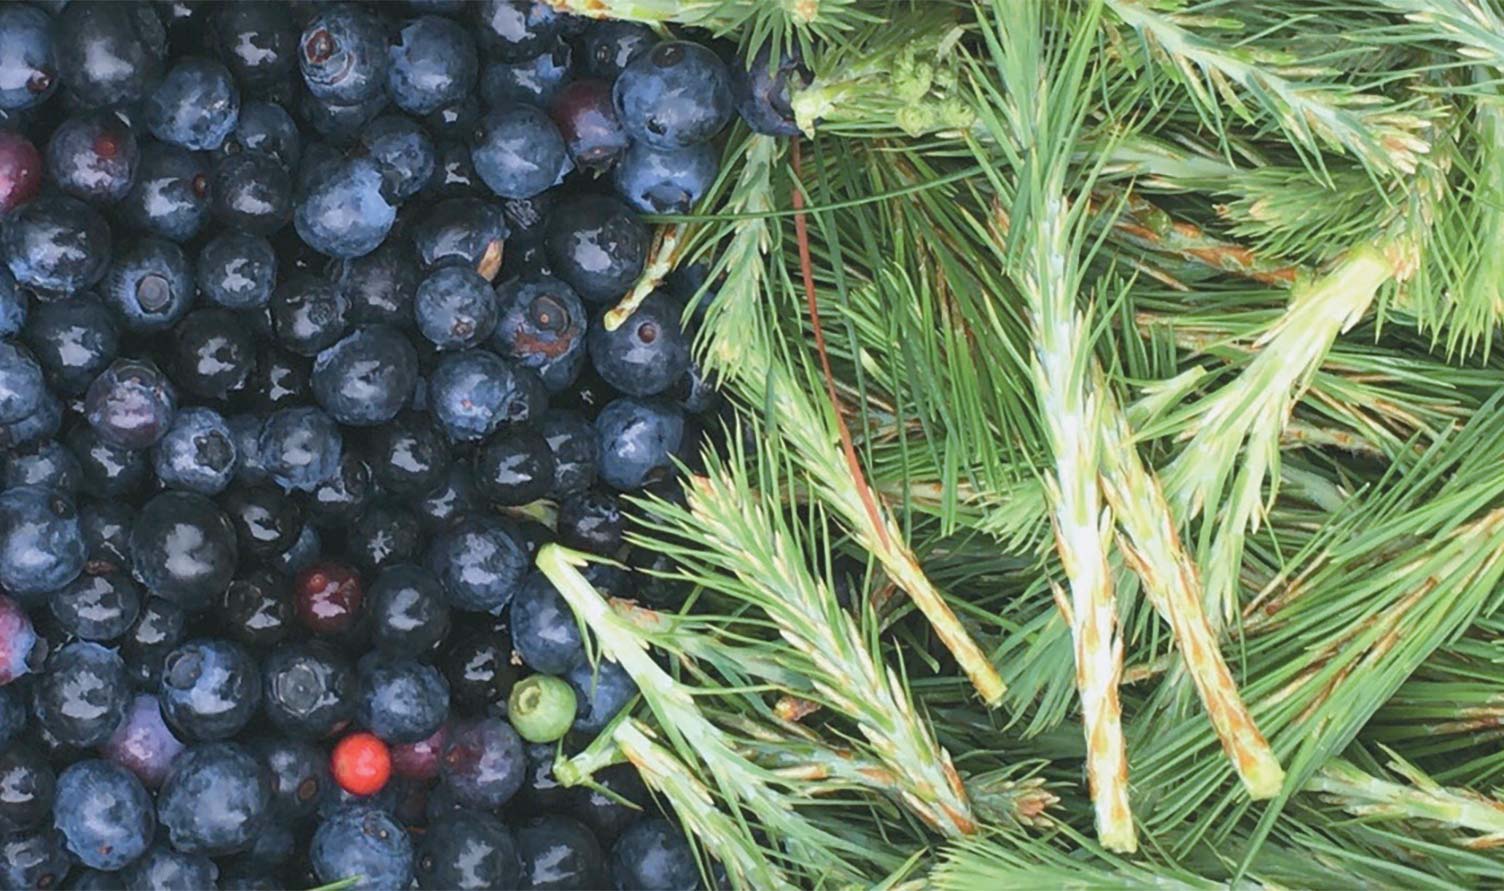 Blueberries and Pine